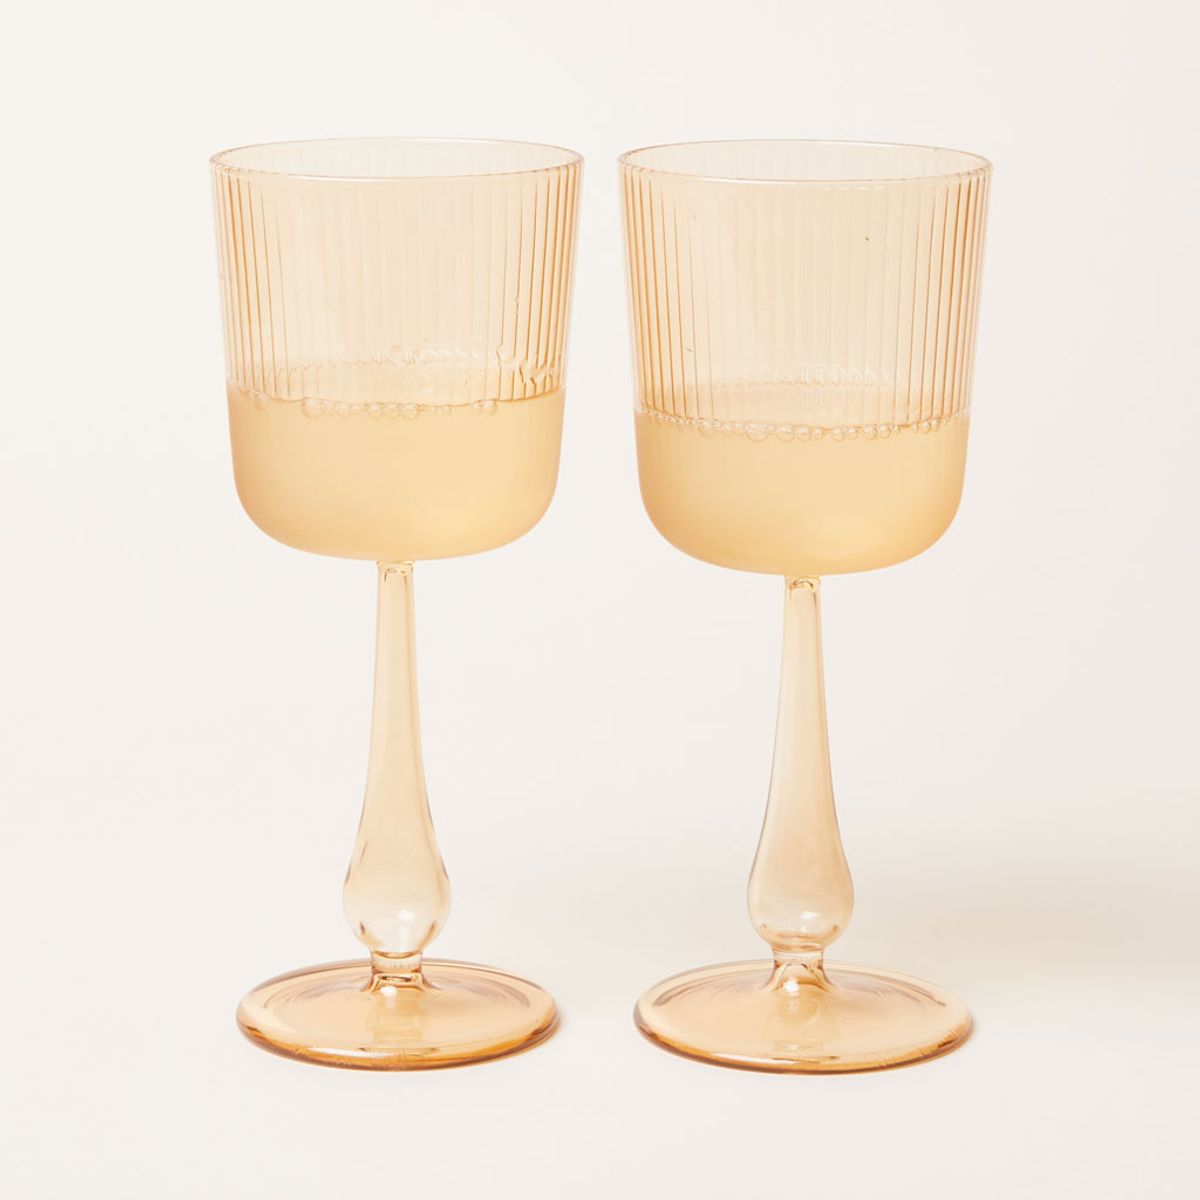 A pair of stemmed wine glasses made of pale yellow glass